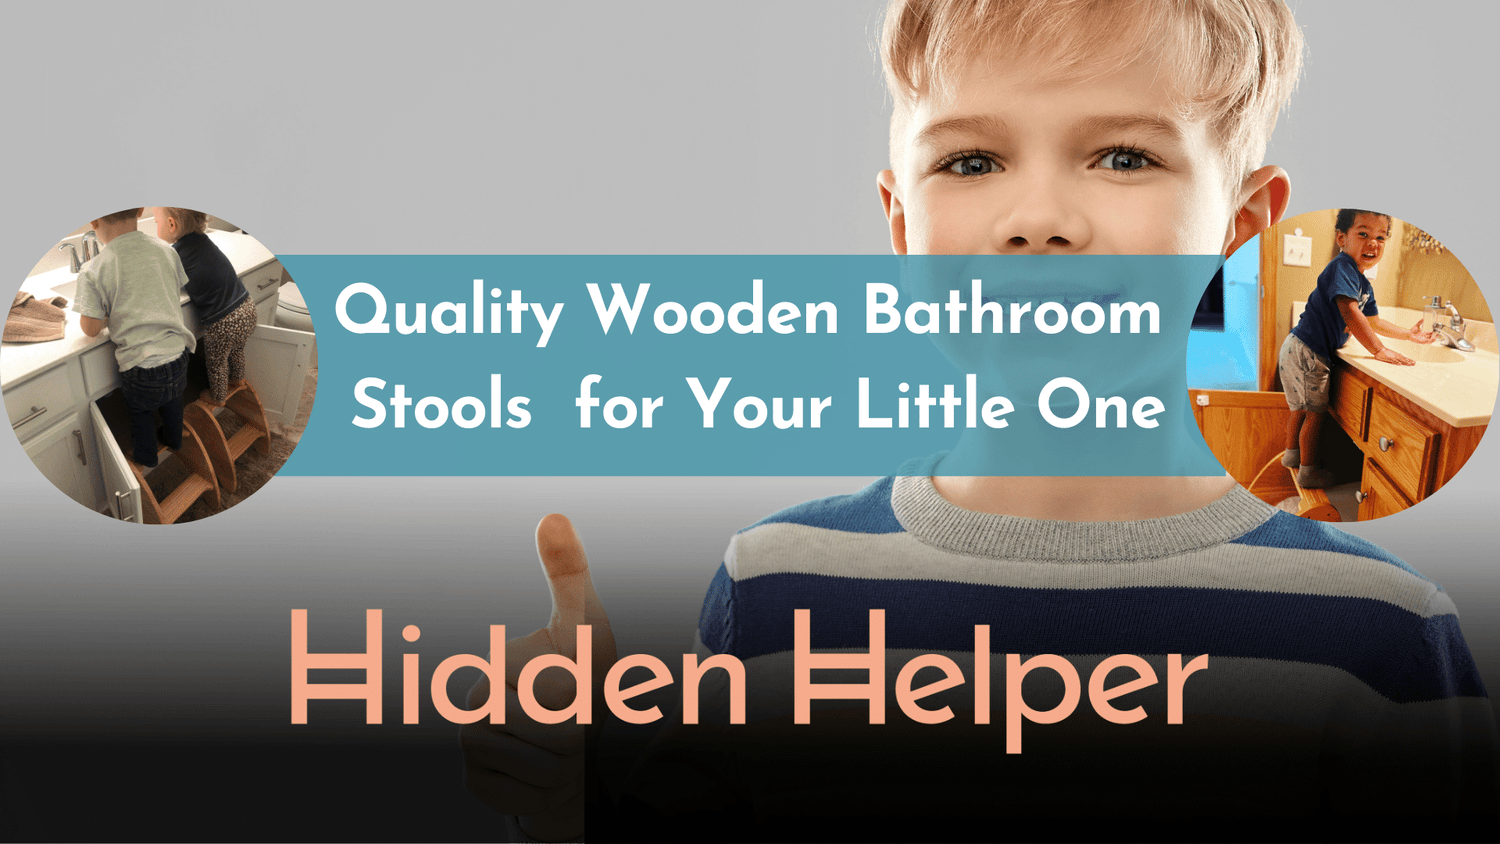 High-Quality Wooden Bathroom Stools at an Affordable Price